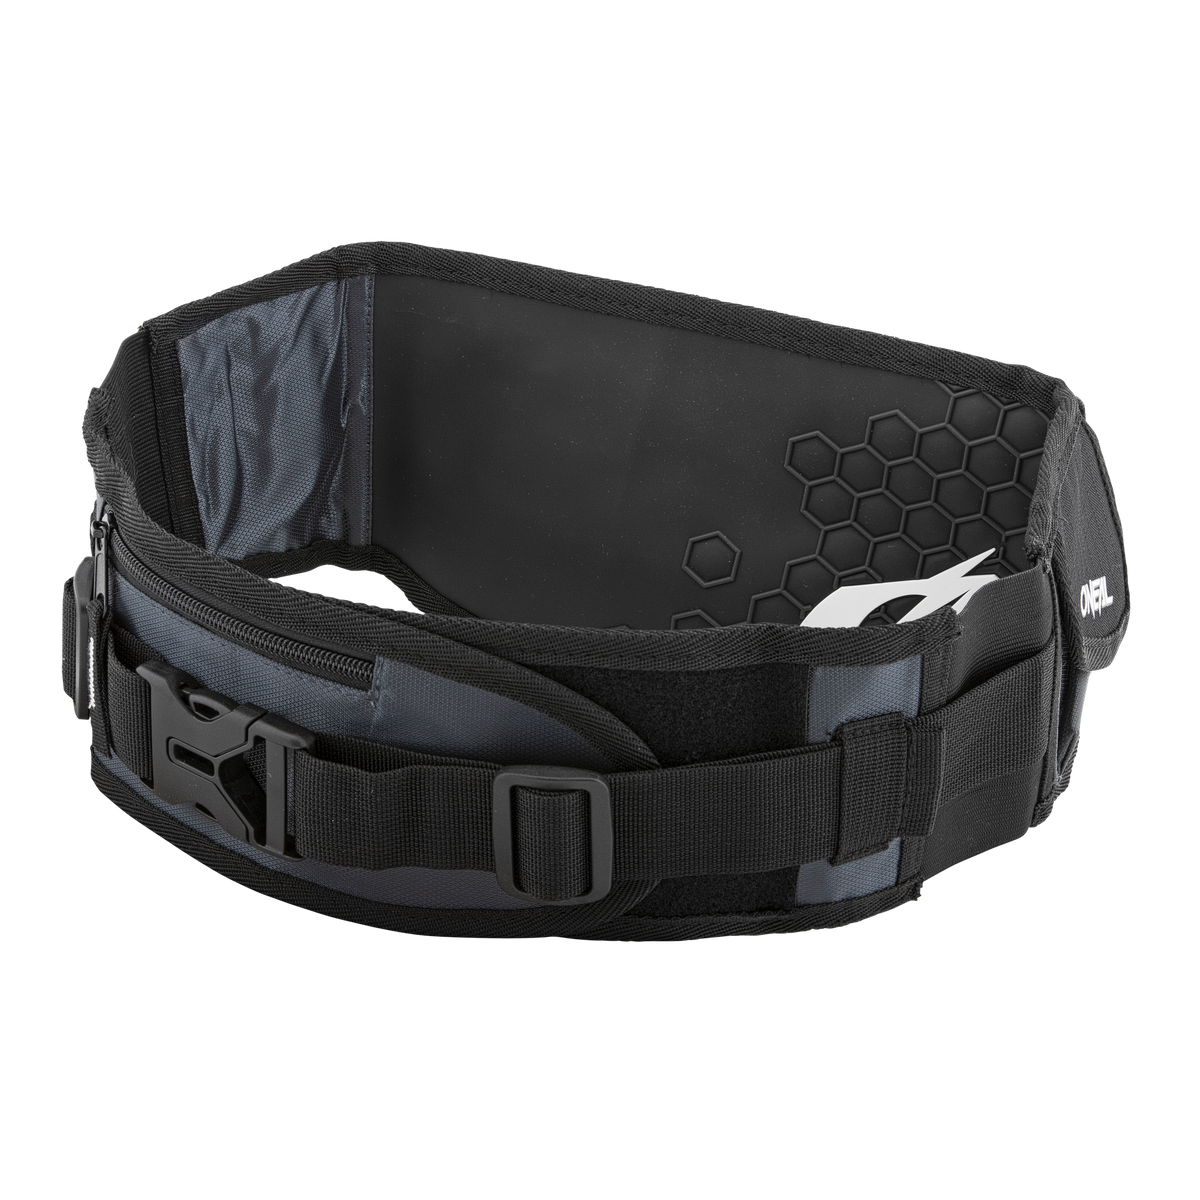 https://cdn.oneal.eu/assets/importedProductImages/ACCESSORIES/WAIST%20TOOLBAG/black/2019_ONeal_WAIST_Toolbag_black_A2.png